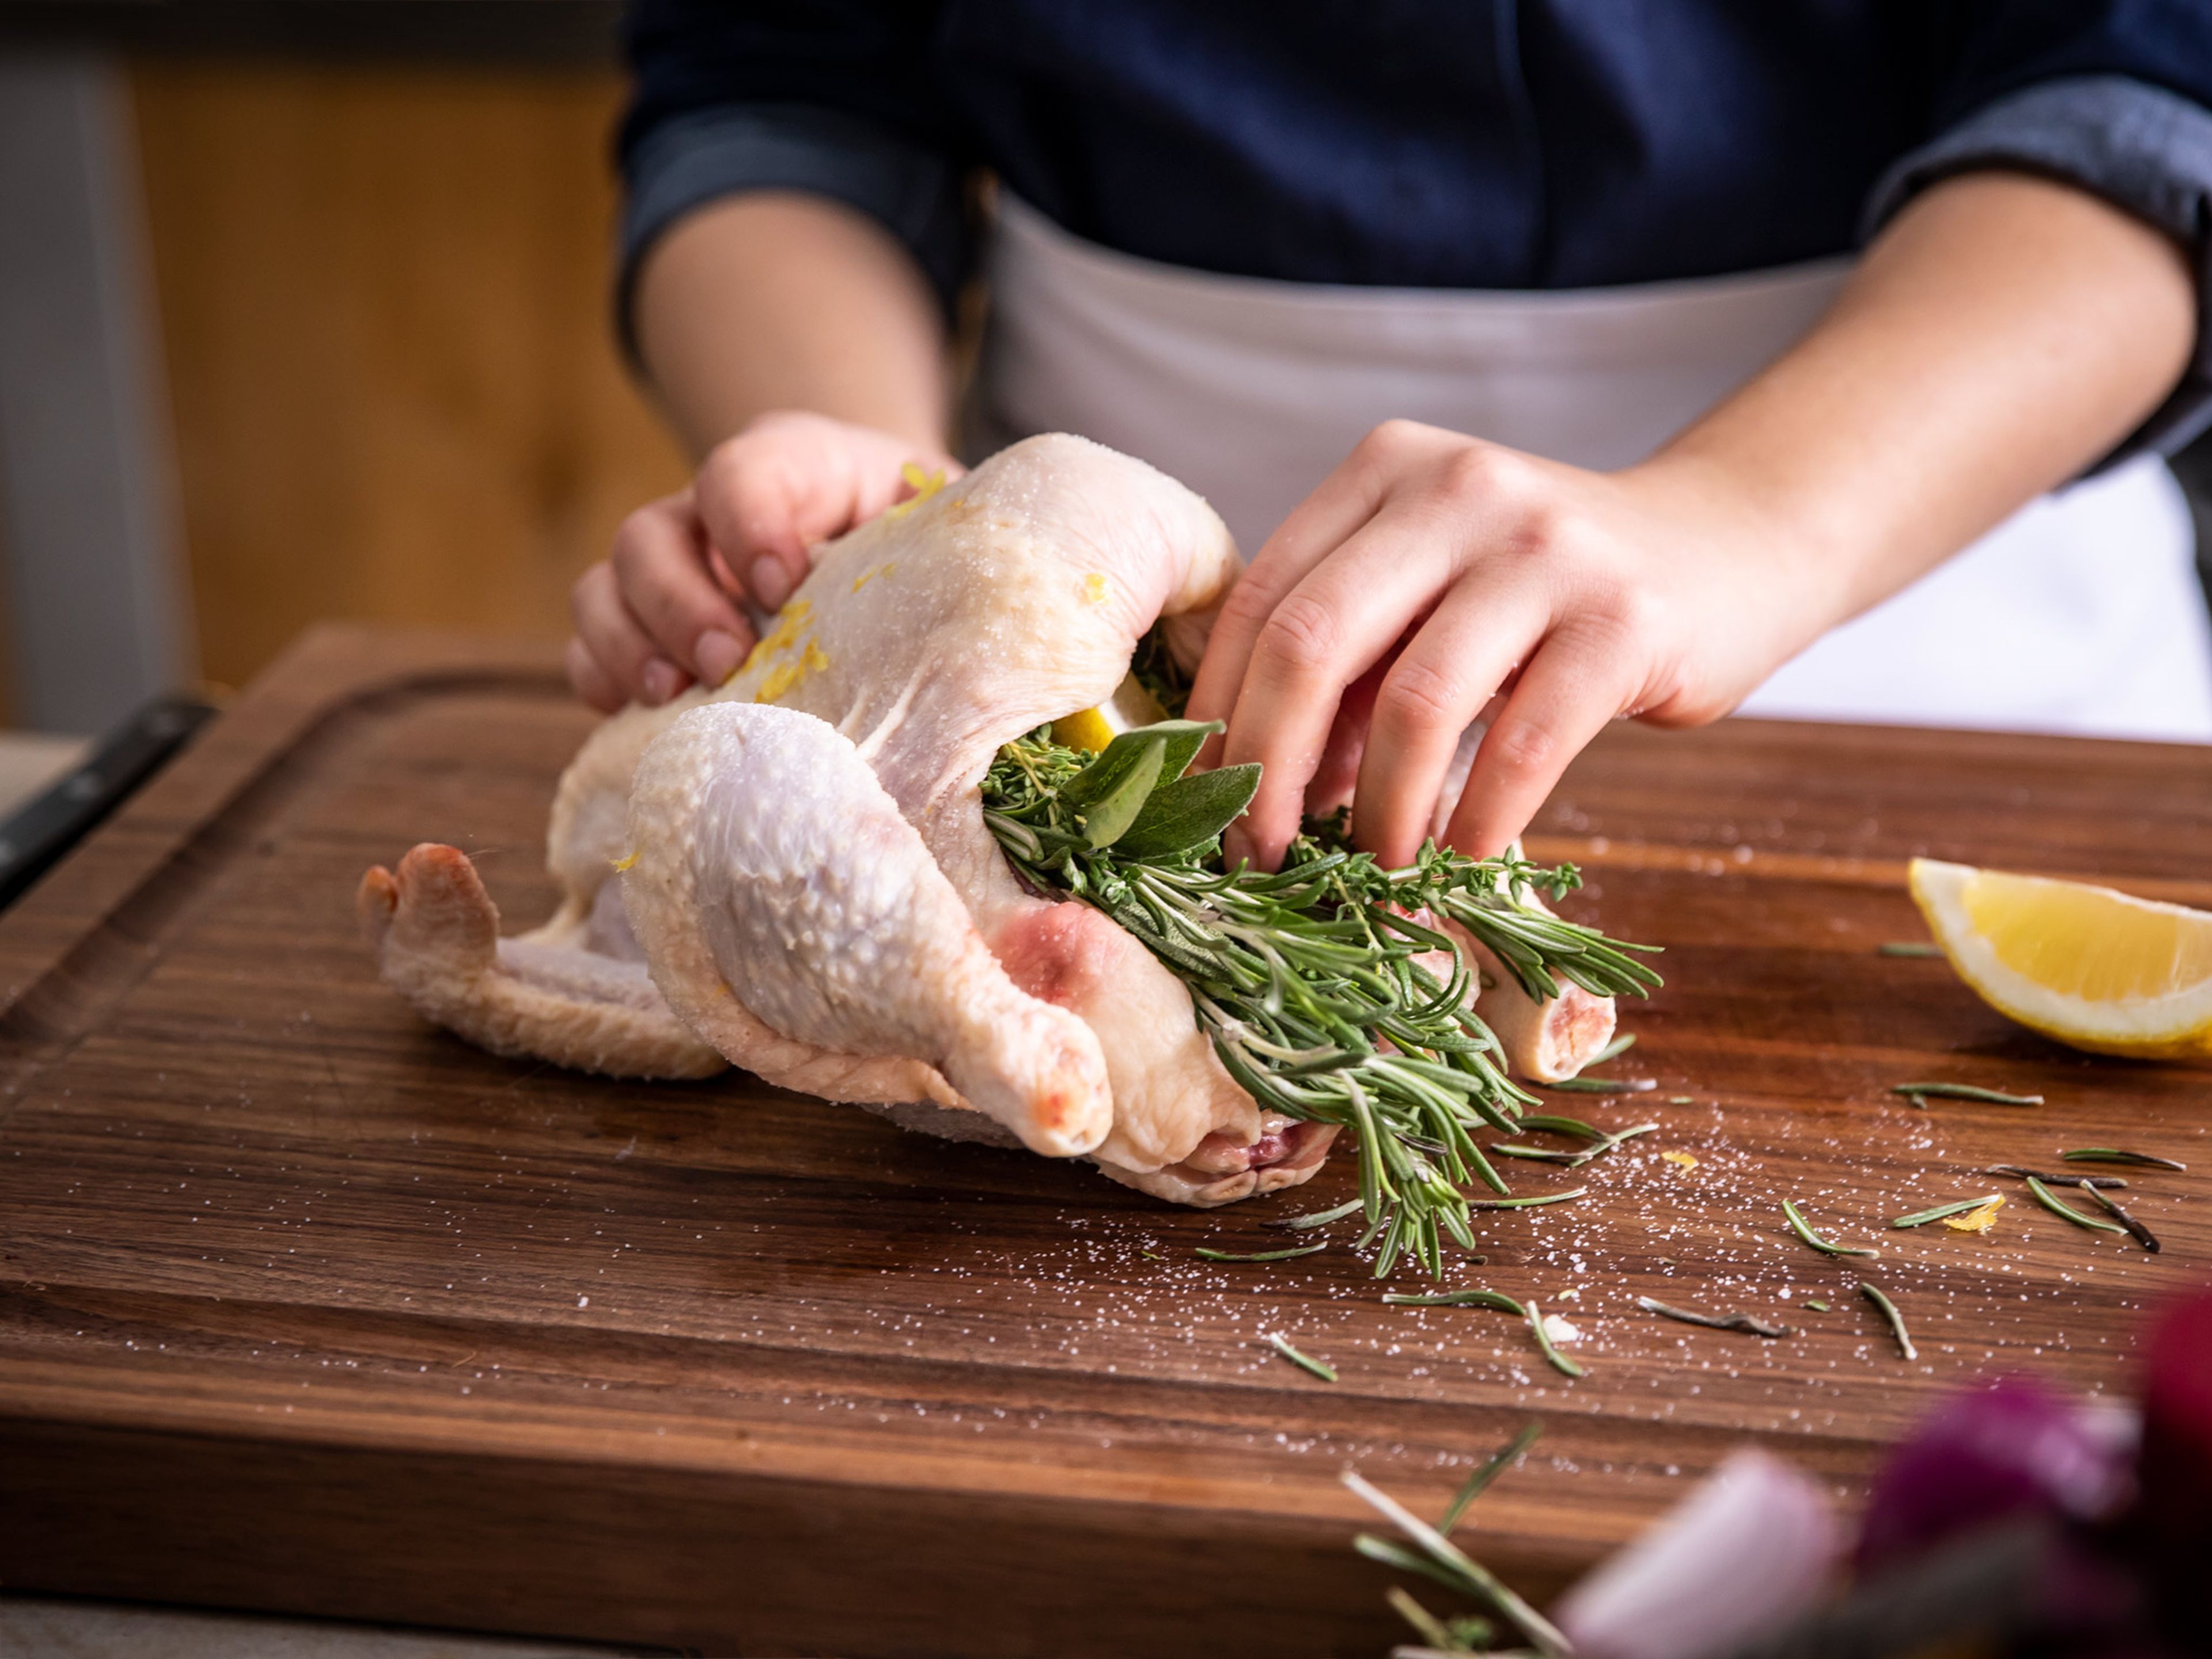 Season the chicken all over with flaky sea salt, rubbing it into the skin. Zest half the lemon and rub into the chicken skin. Quarter the lemon and stuff into the chicken cavity along with thyme, rosemary, and sage.